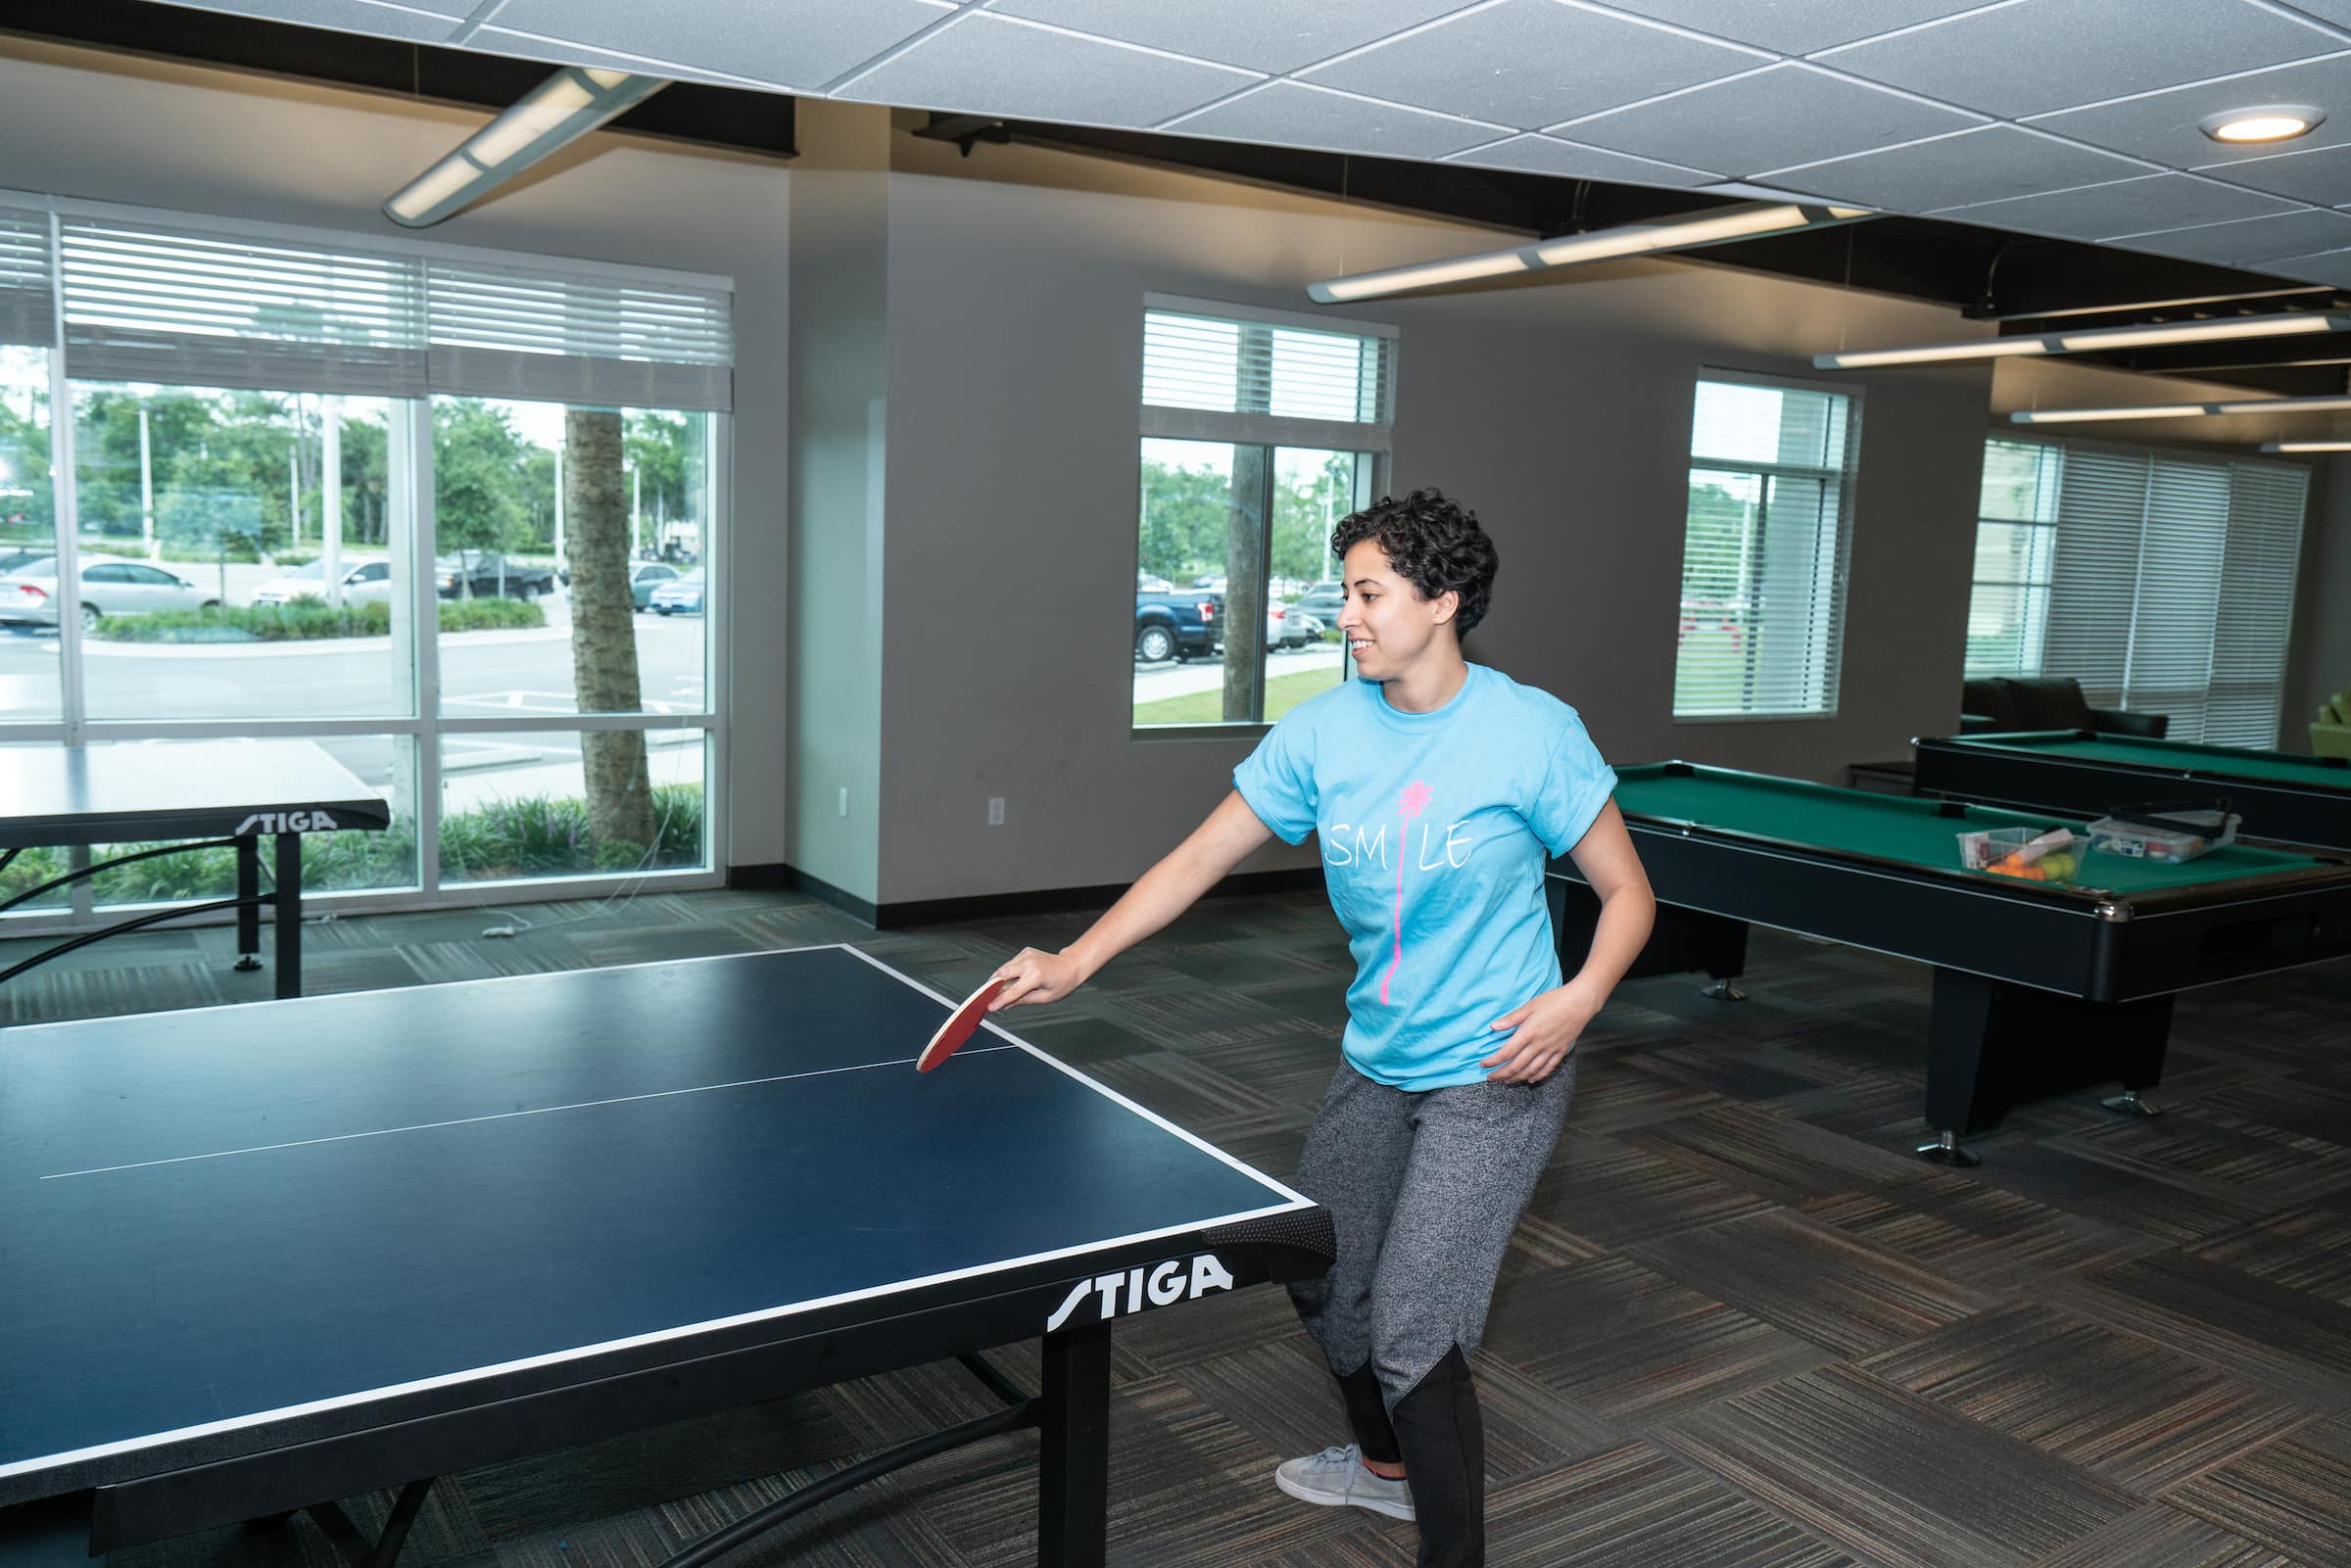 A student plays ping pong with a pool table in the background in New hall.